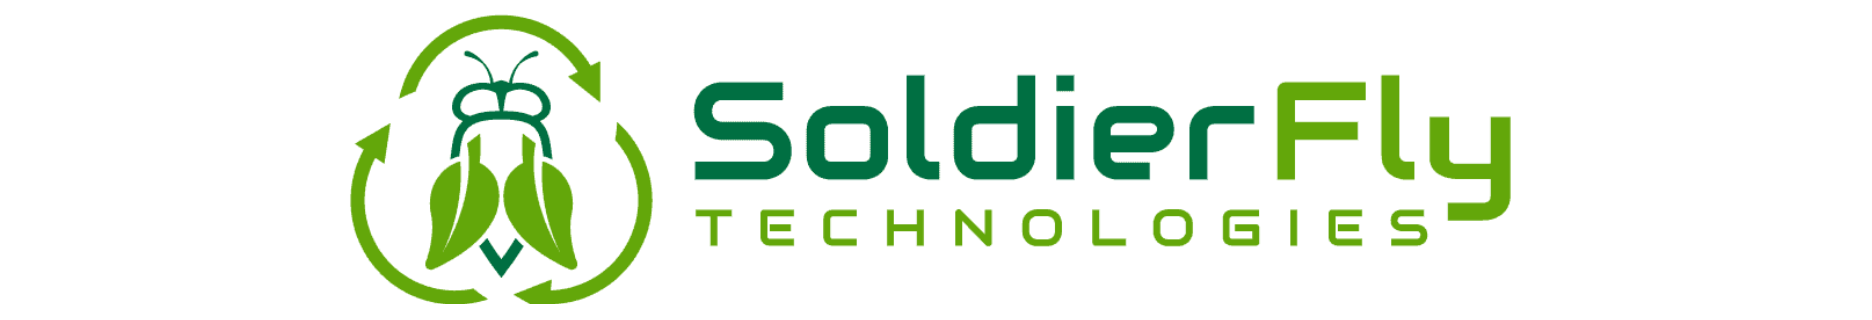 Soldier Fly Technologies logo